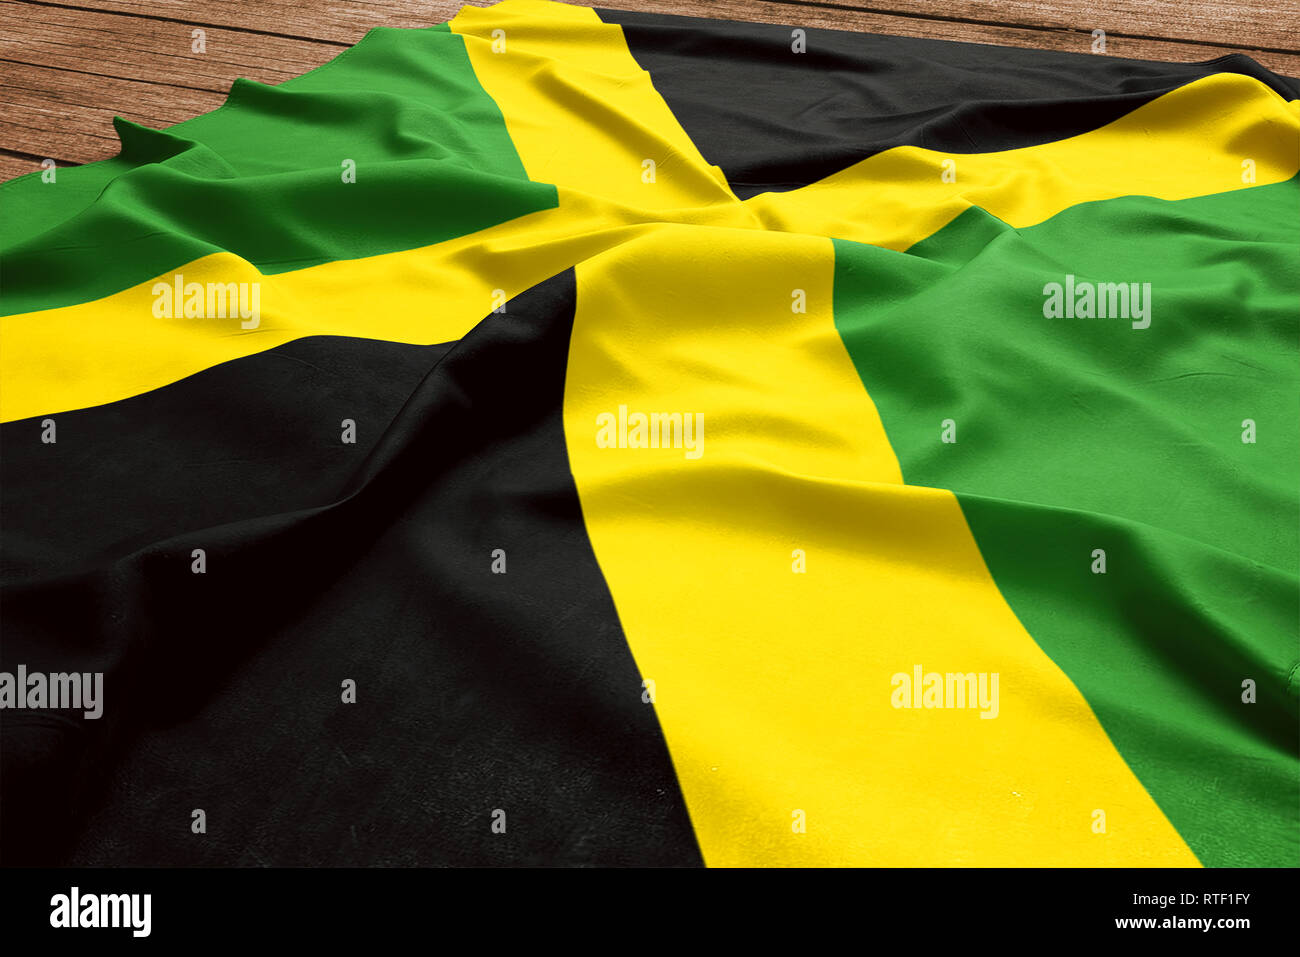 Flag of Jamaica on a wooden desk background. Silk Jamaican flag top view. Stock Photo